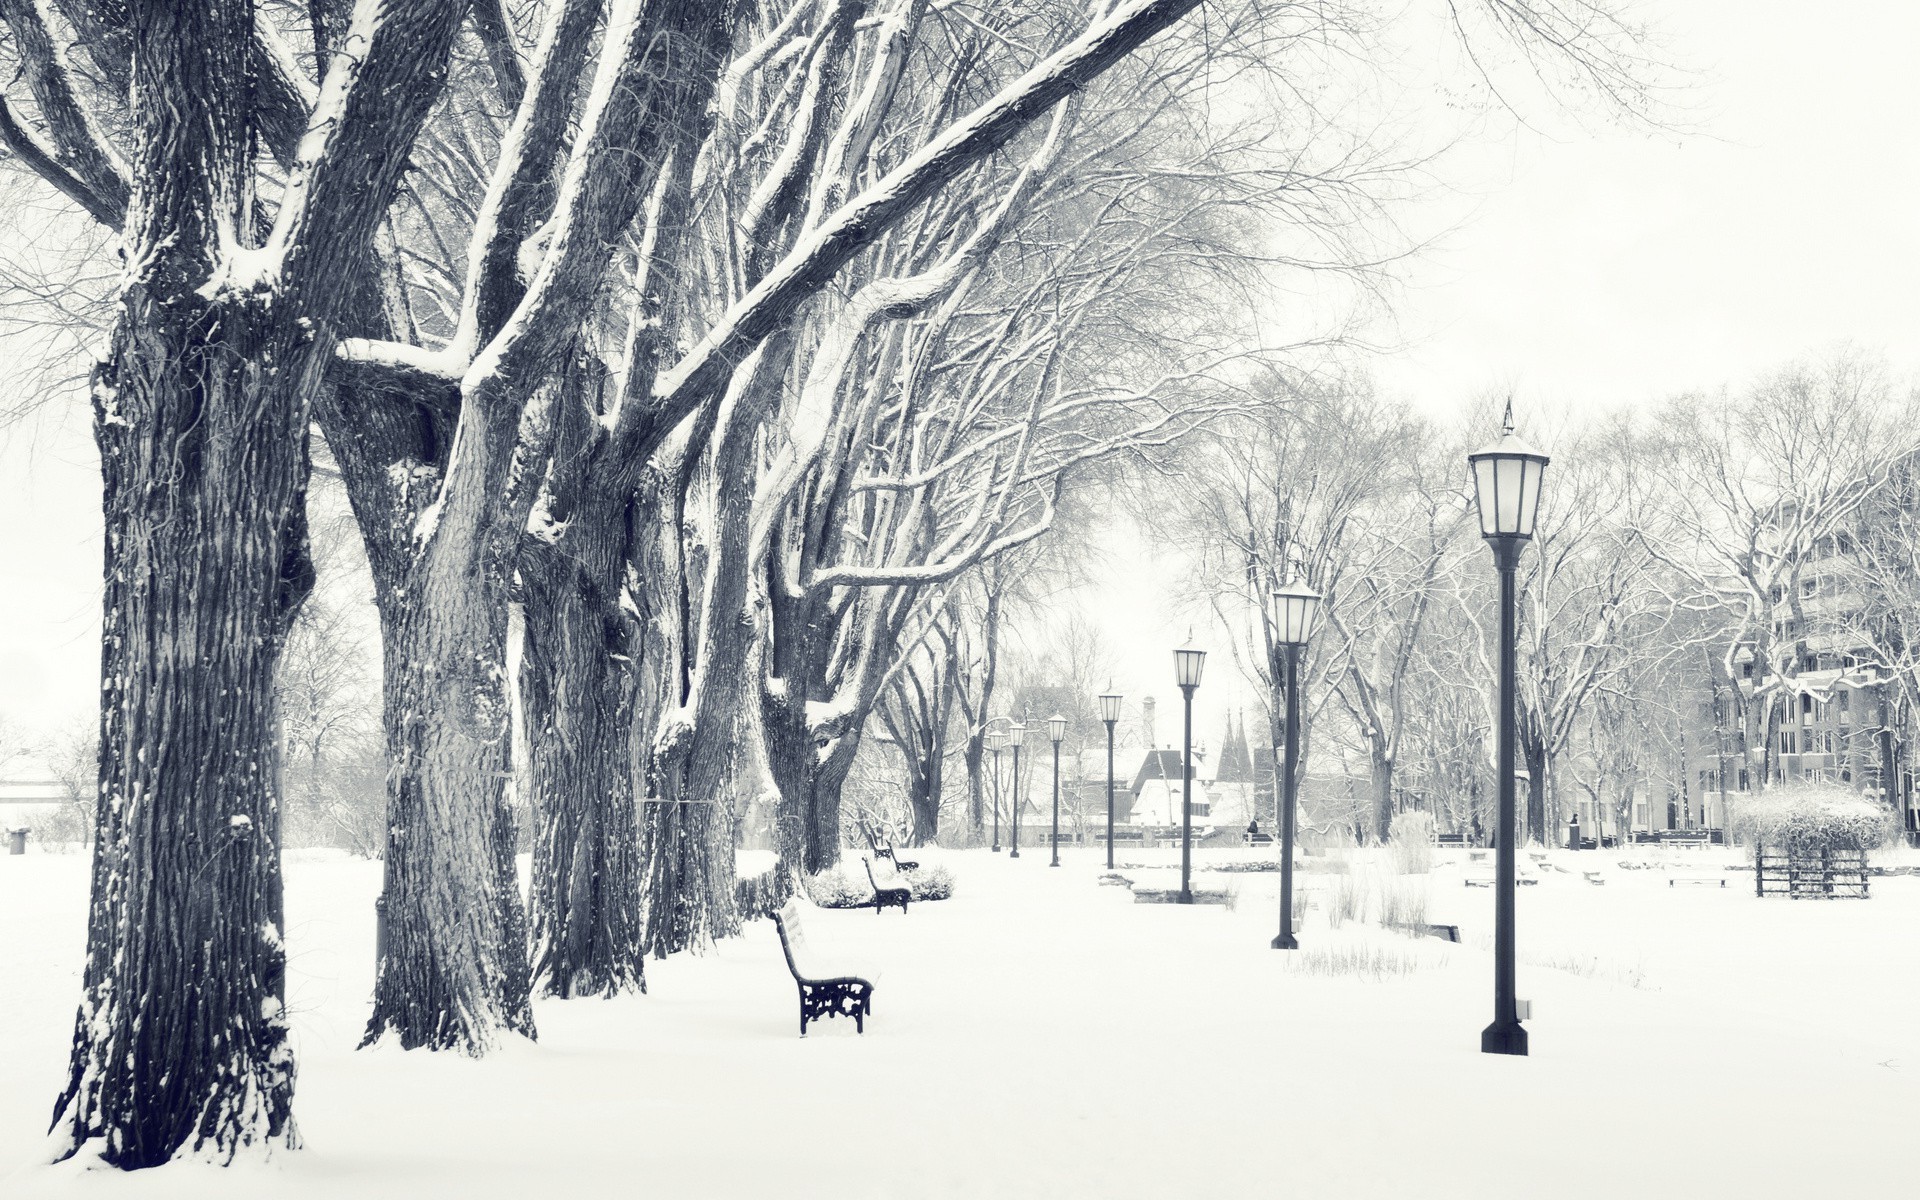 Photography, Landscape, Nature, Winter, Trees, Snow, Urban, City, Park, Bench Wallpapers HD / Desktop and Mobile Backgrounds